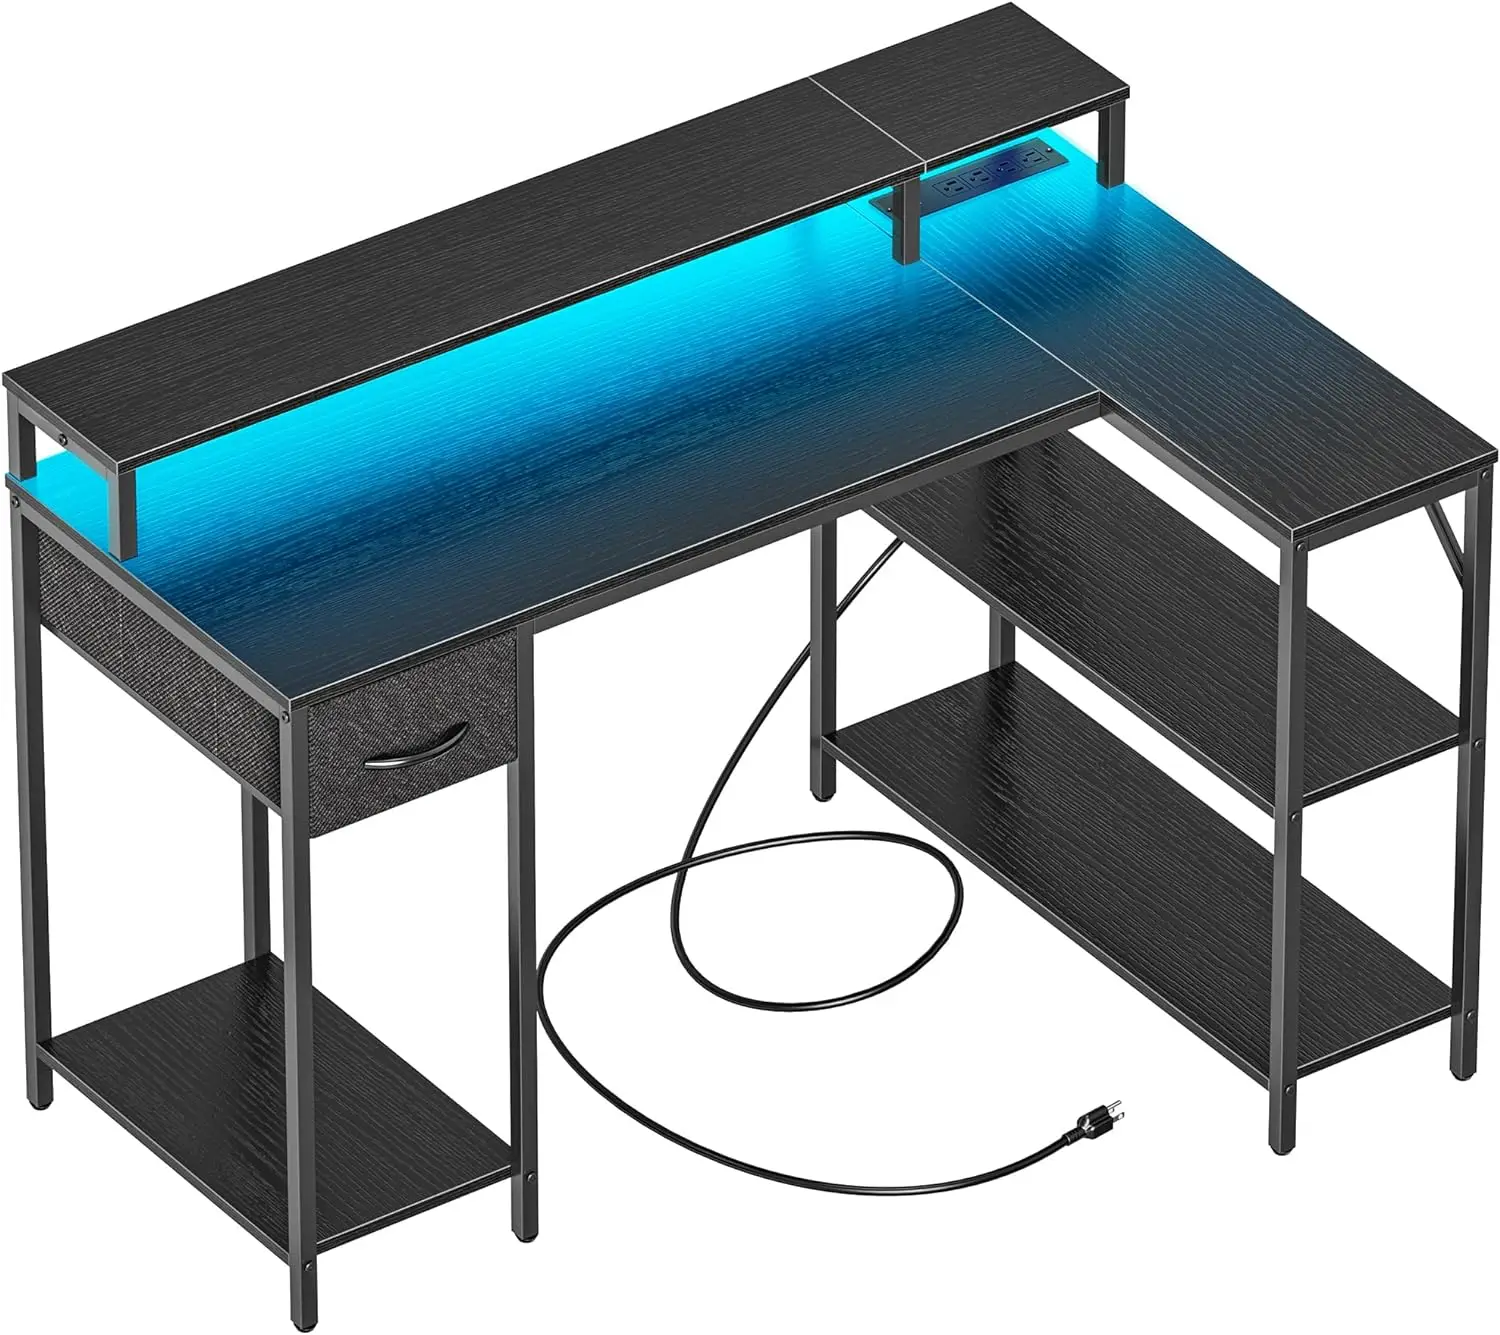 L Shaped Gaming Desk with LED Lights & Power Outlets, Reversible Computer Desk with Storage Shelves & Drawer ly tbk 905a drawer type uv ultraviolet curing led box led lights 200w 110v 220v common use working size 230 290mm